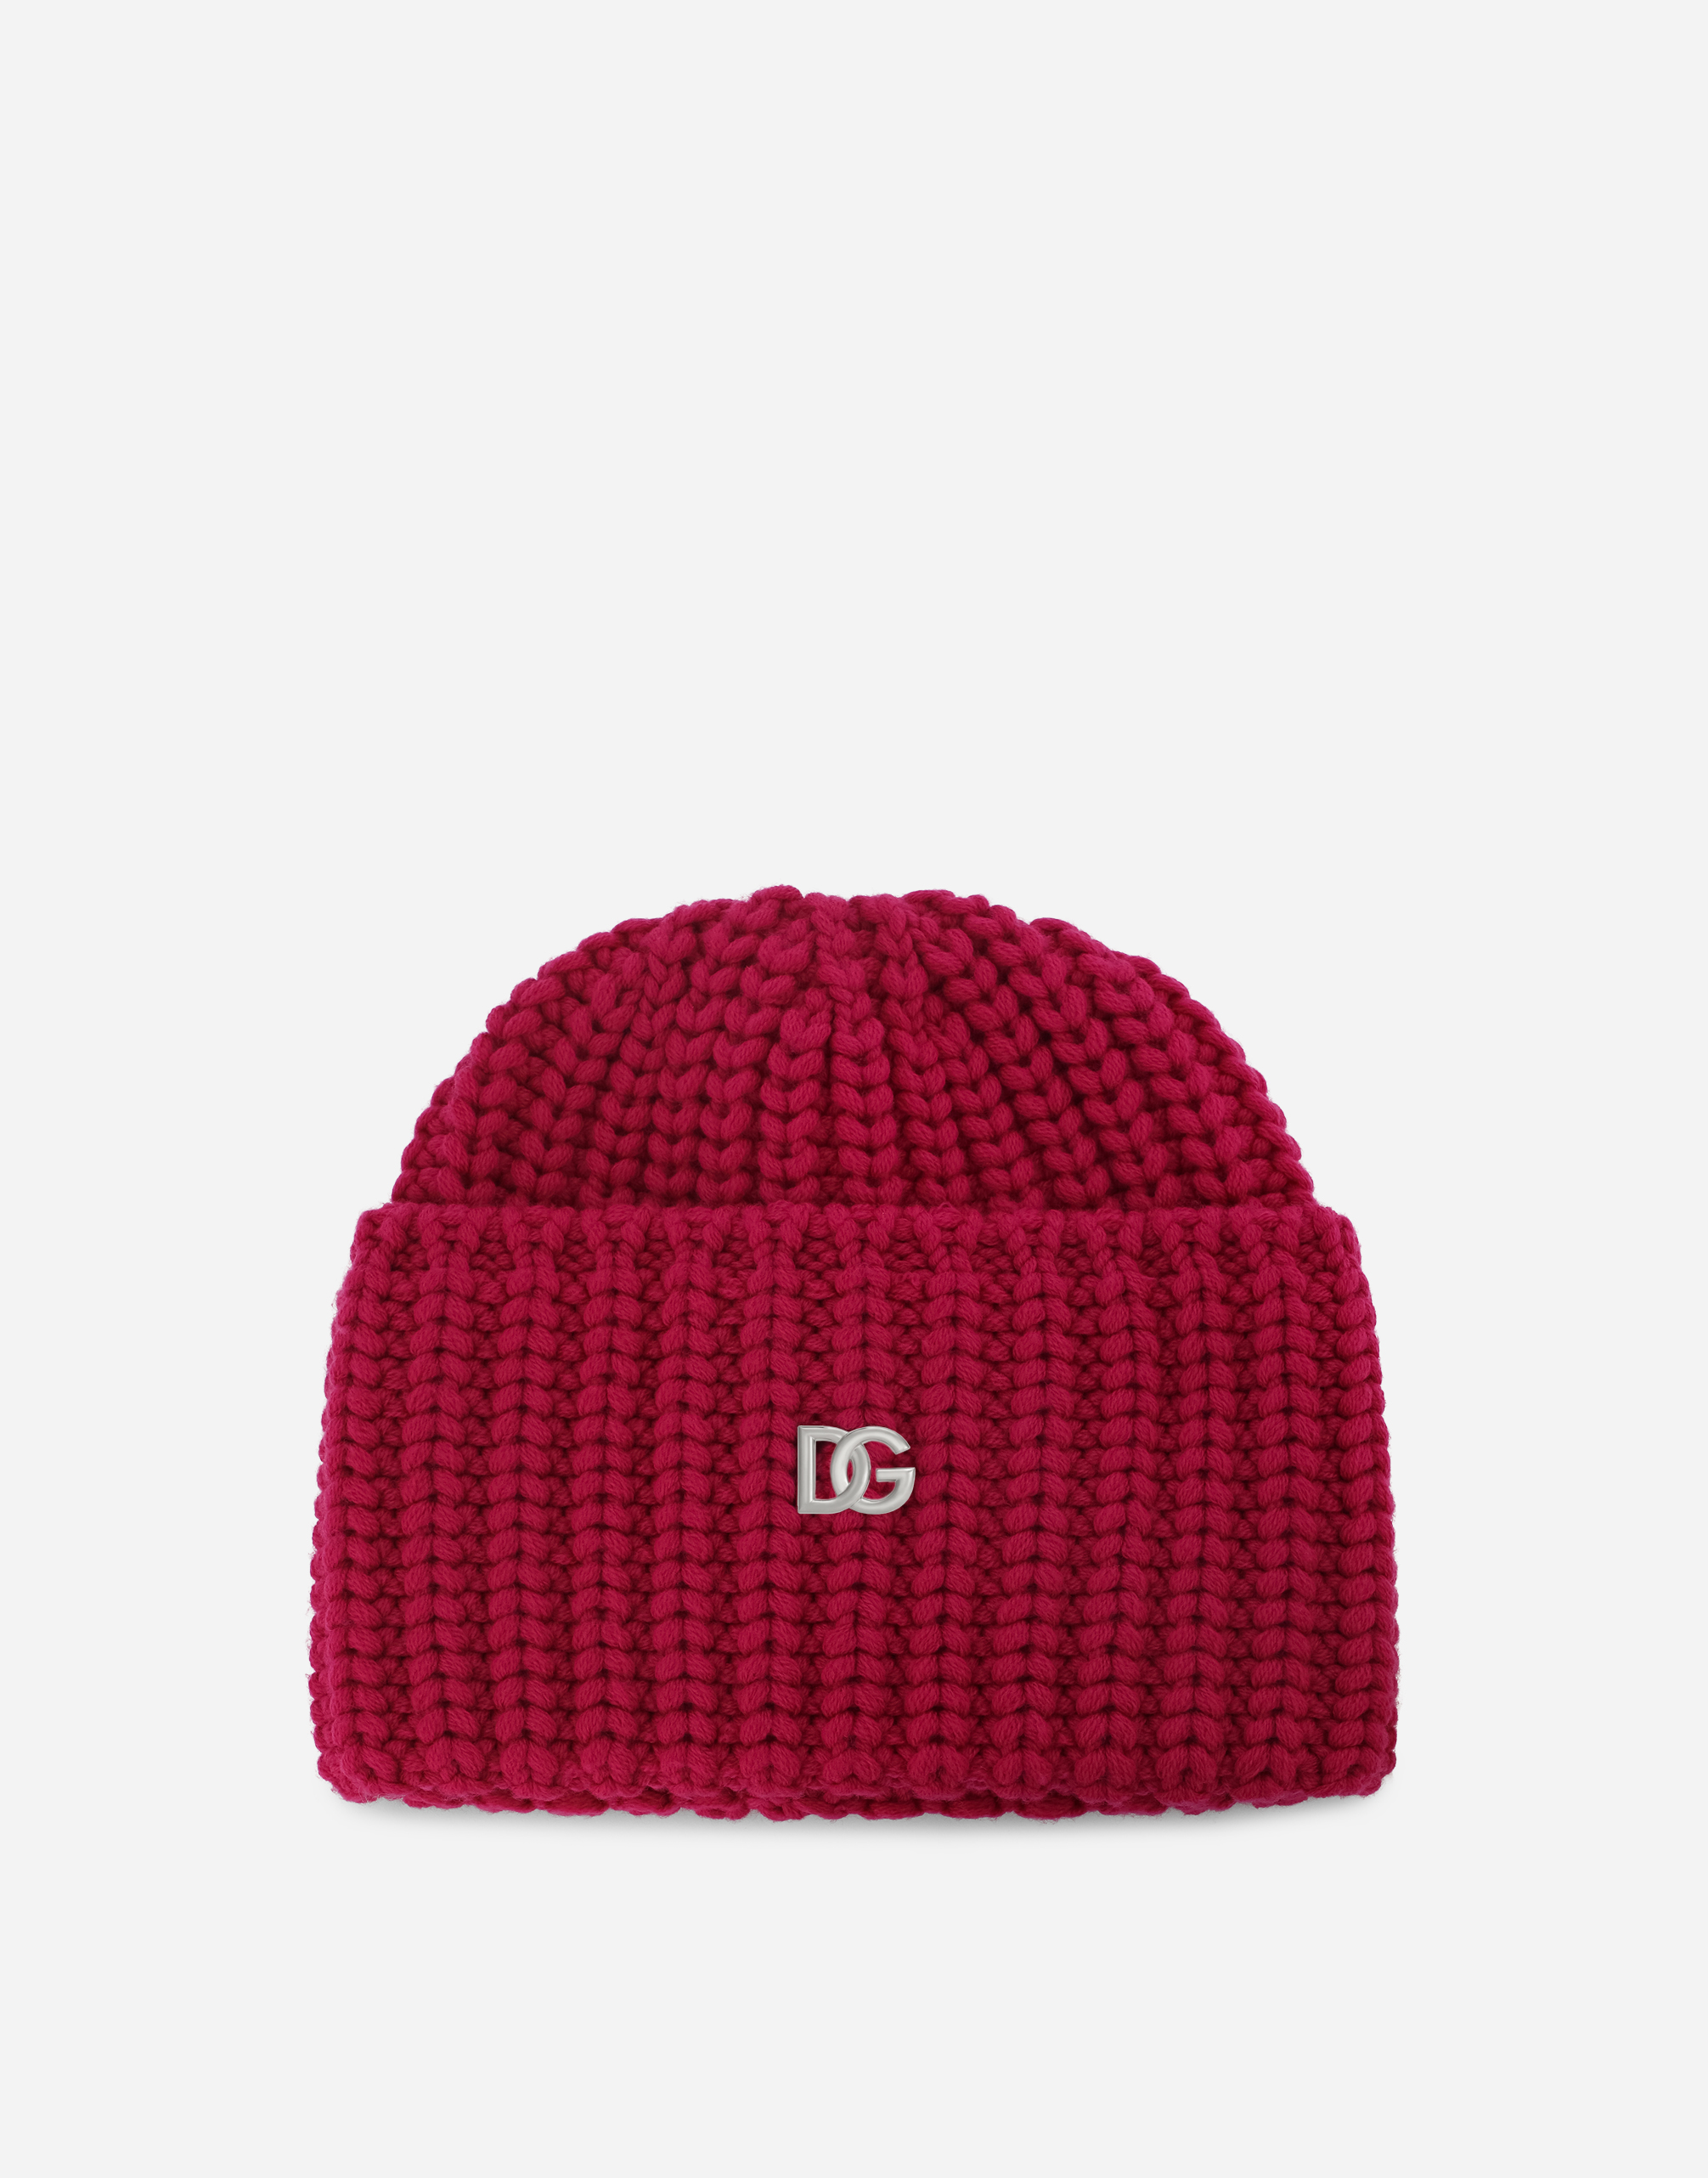 Knit wool hat with DG patch in Bordeaux